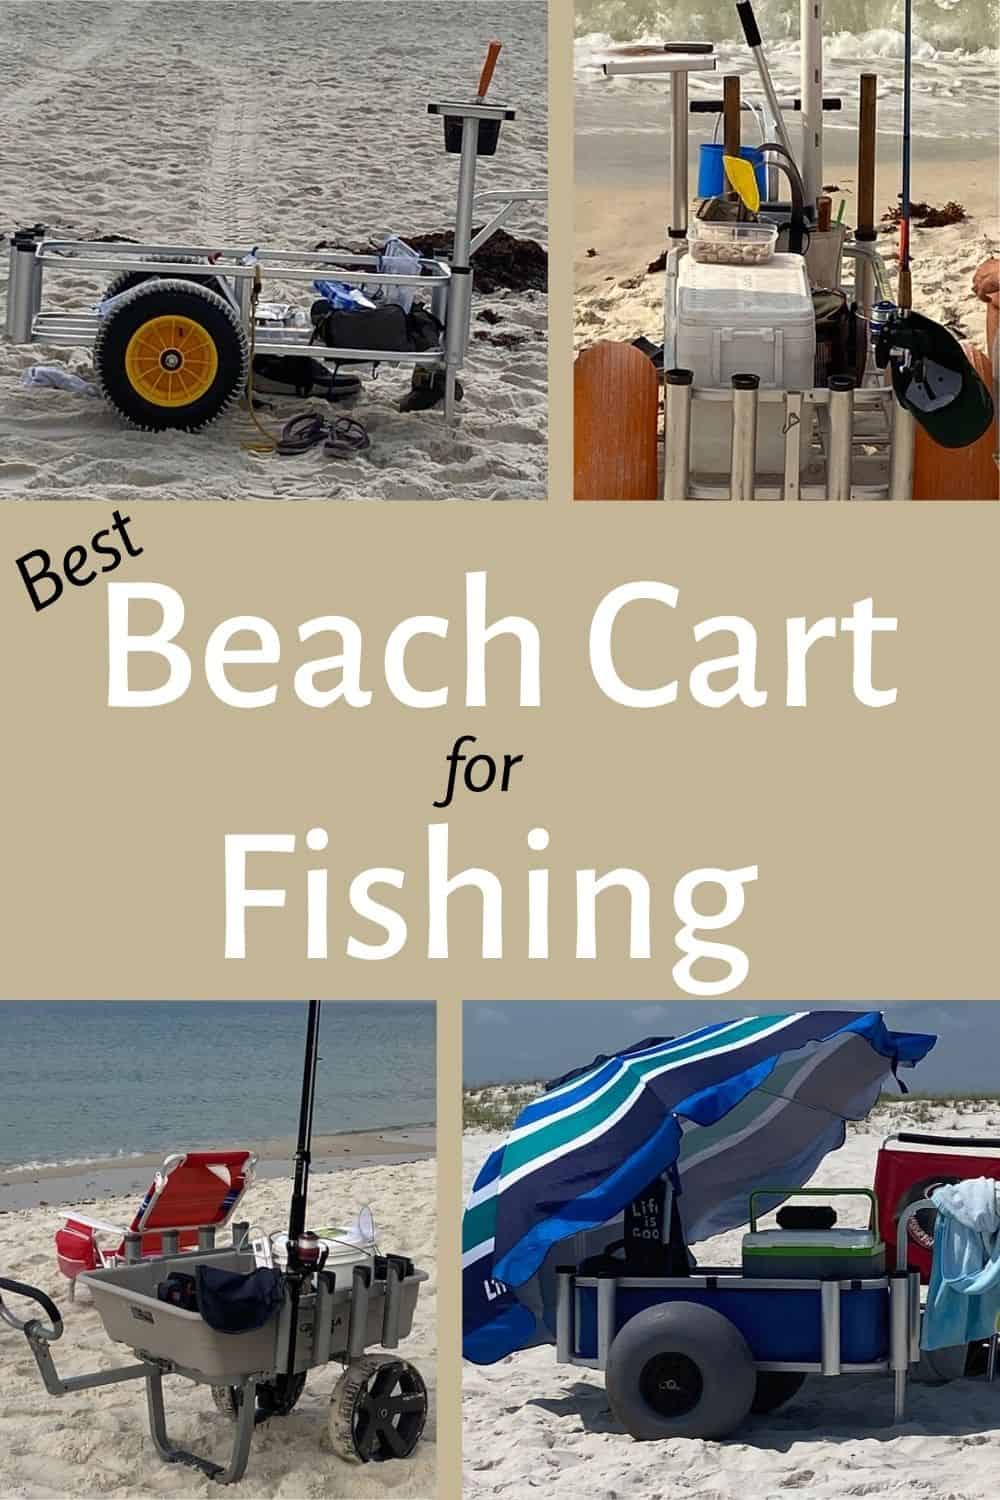 Best Fishing Cart - For Surf Fishing on Hard or Soft Sand